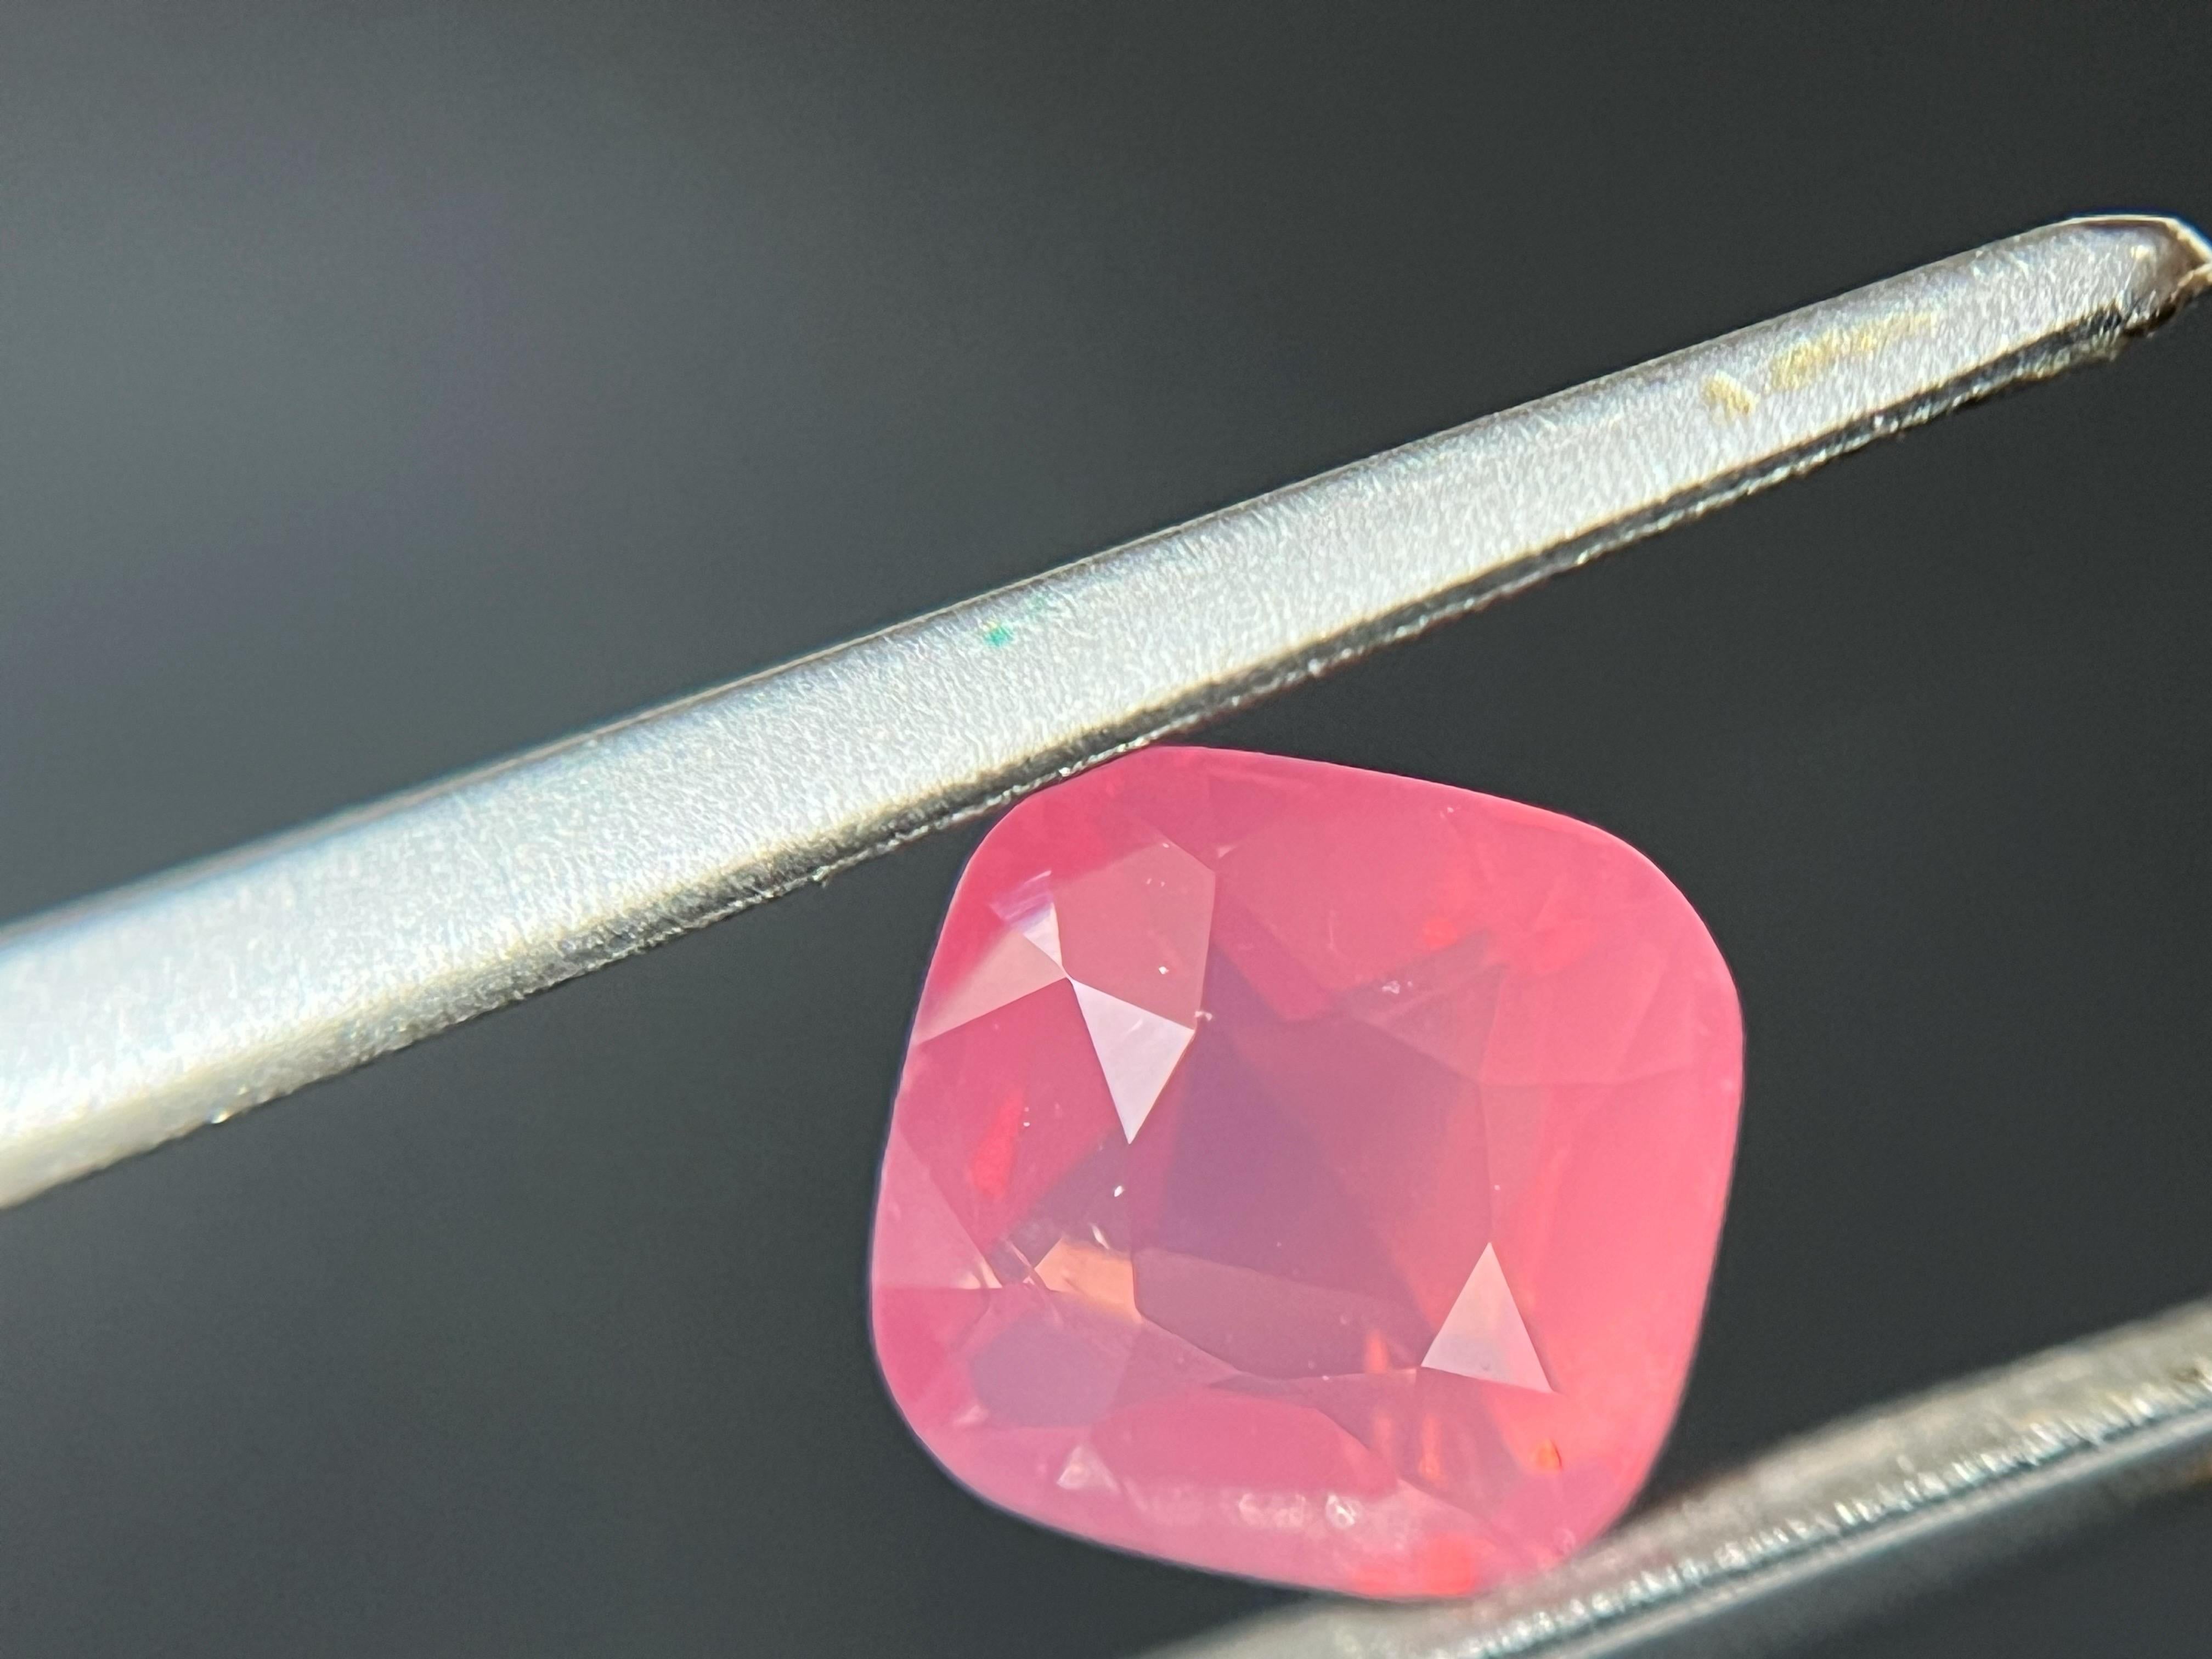 Introducing our exceptional Mahenge spinel with a silky body neon peach color and orange fire that is truly one-of-a-kind. This gemstone is a marvel of nature, with its rare and captivating hue that exudes warmth and vitality.

Sourced from the